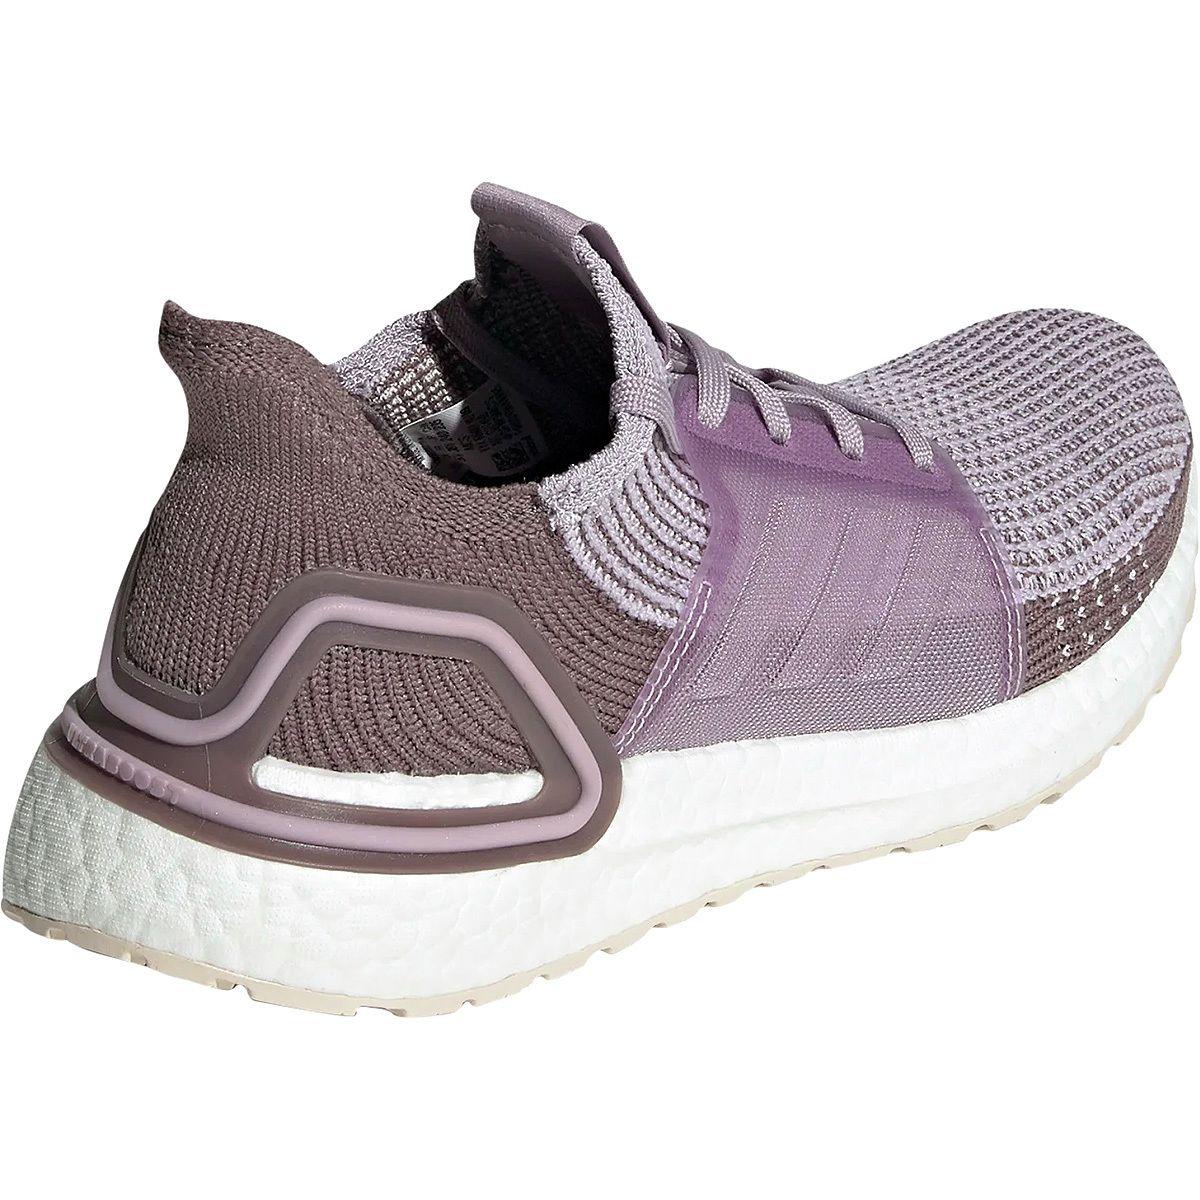 adidas Ultraboost 19 Running Shoes in Purple | Lyst